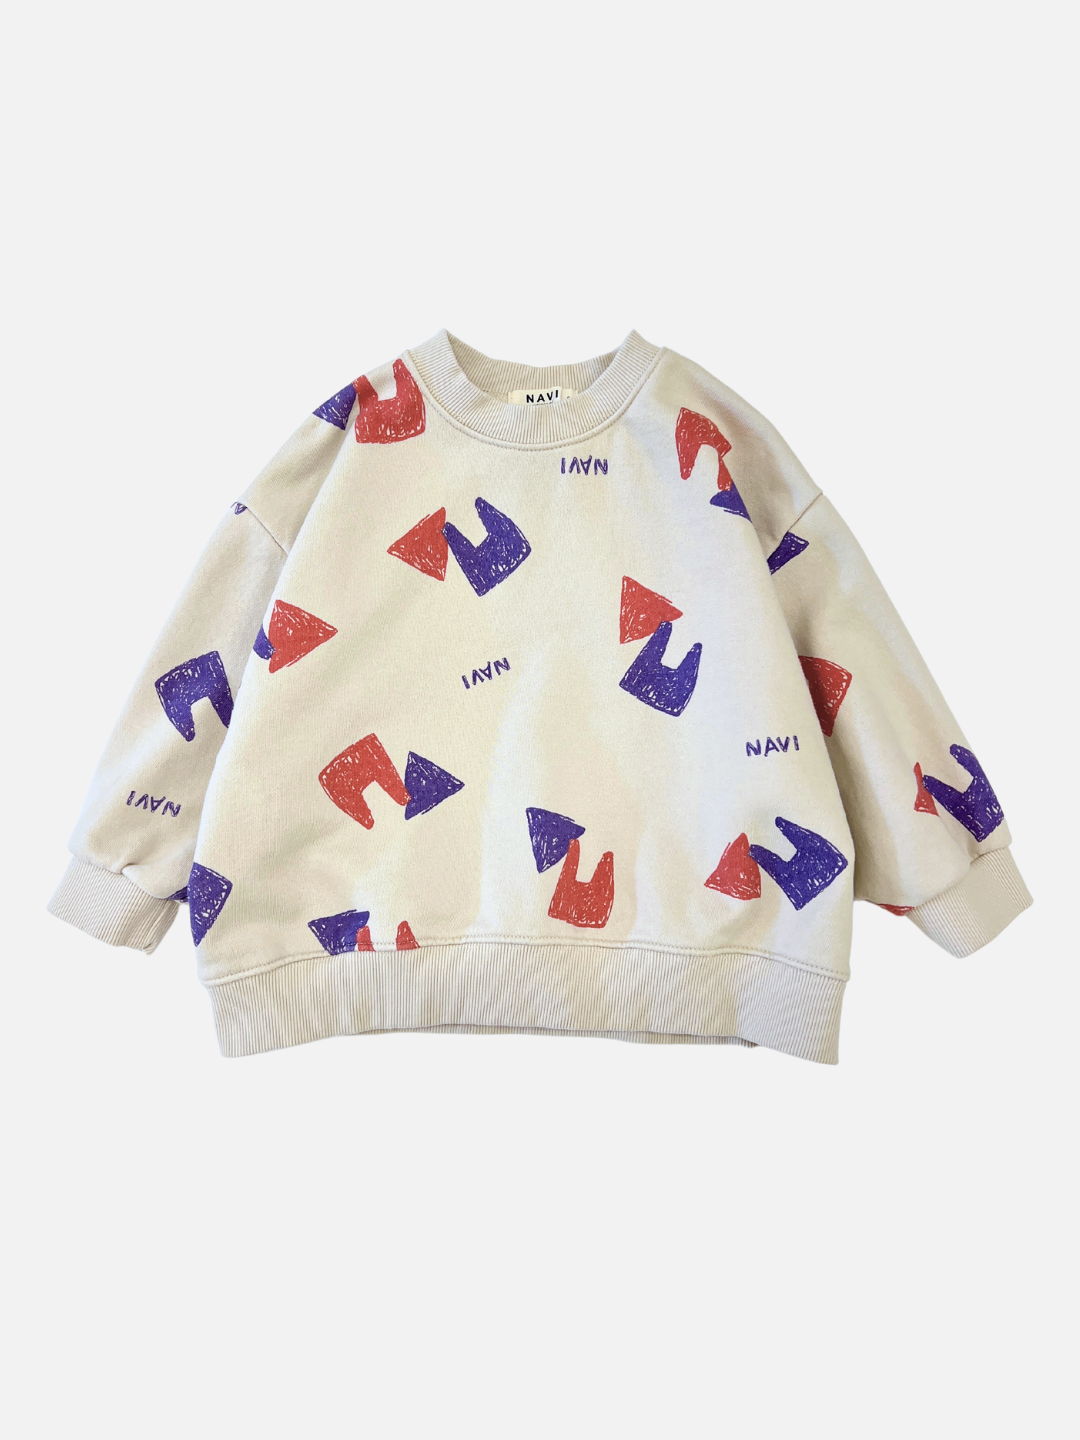 Front view of kids beige crewneck sweatshirt with an all over pattern of red and purple shapes and the brand name Navi.